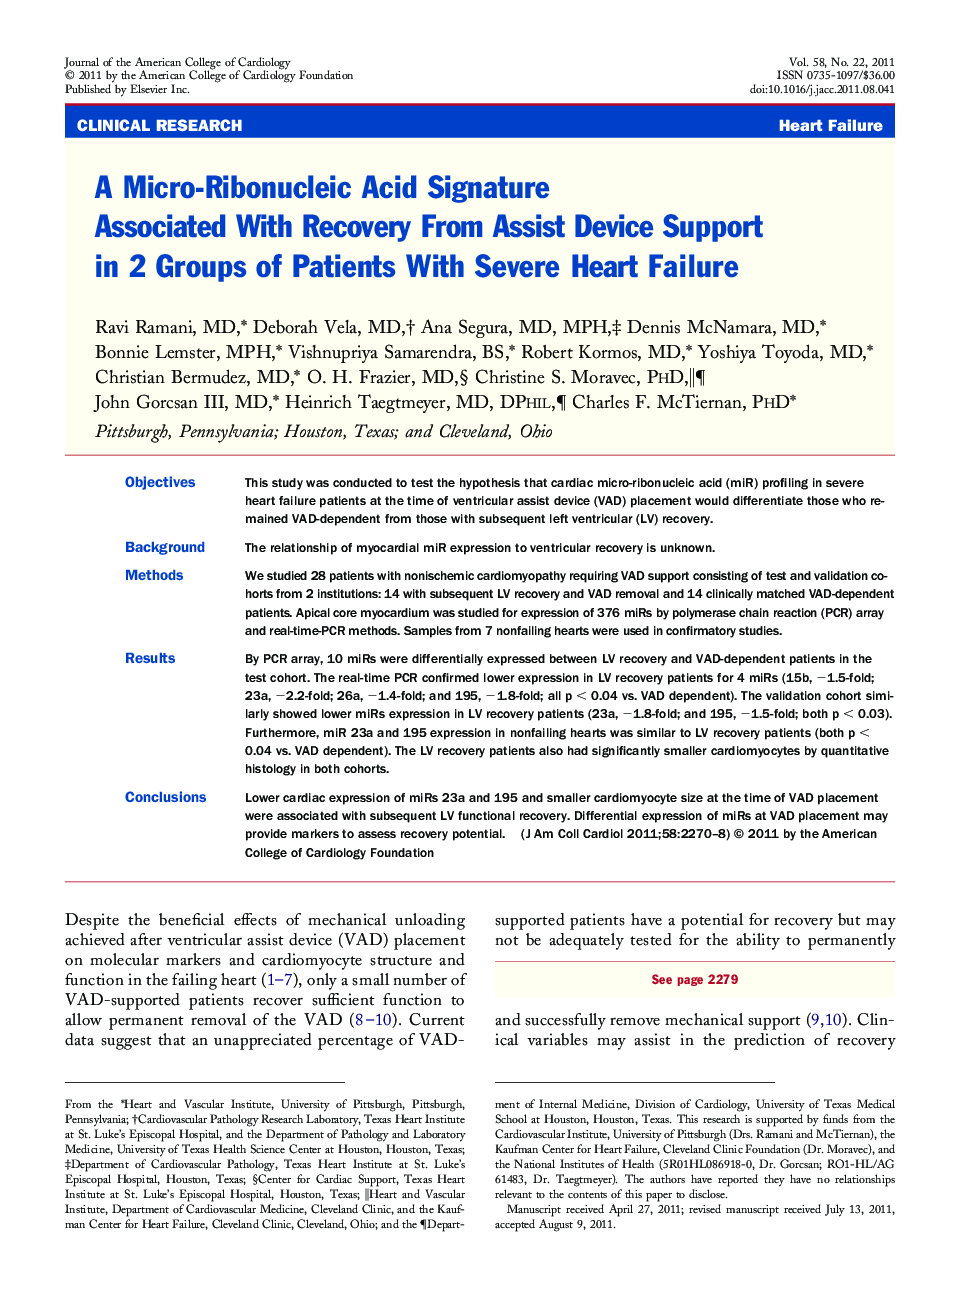 A Micro-Ribonucleic Acid Signature Associated With Recovery From Assist Device Support in 2 Groups of Patients With Severe Heart Failure 